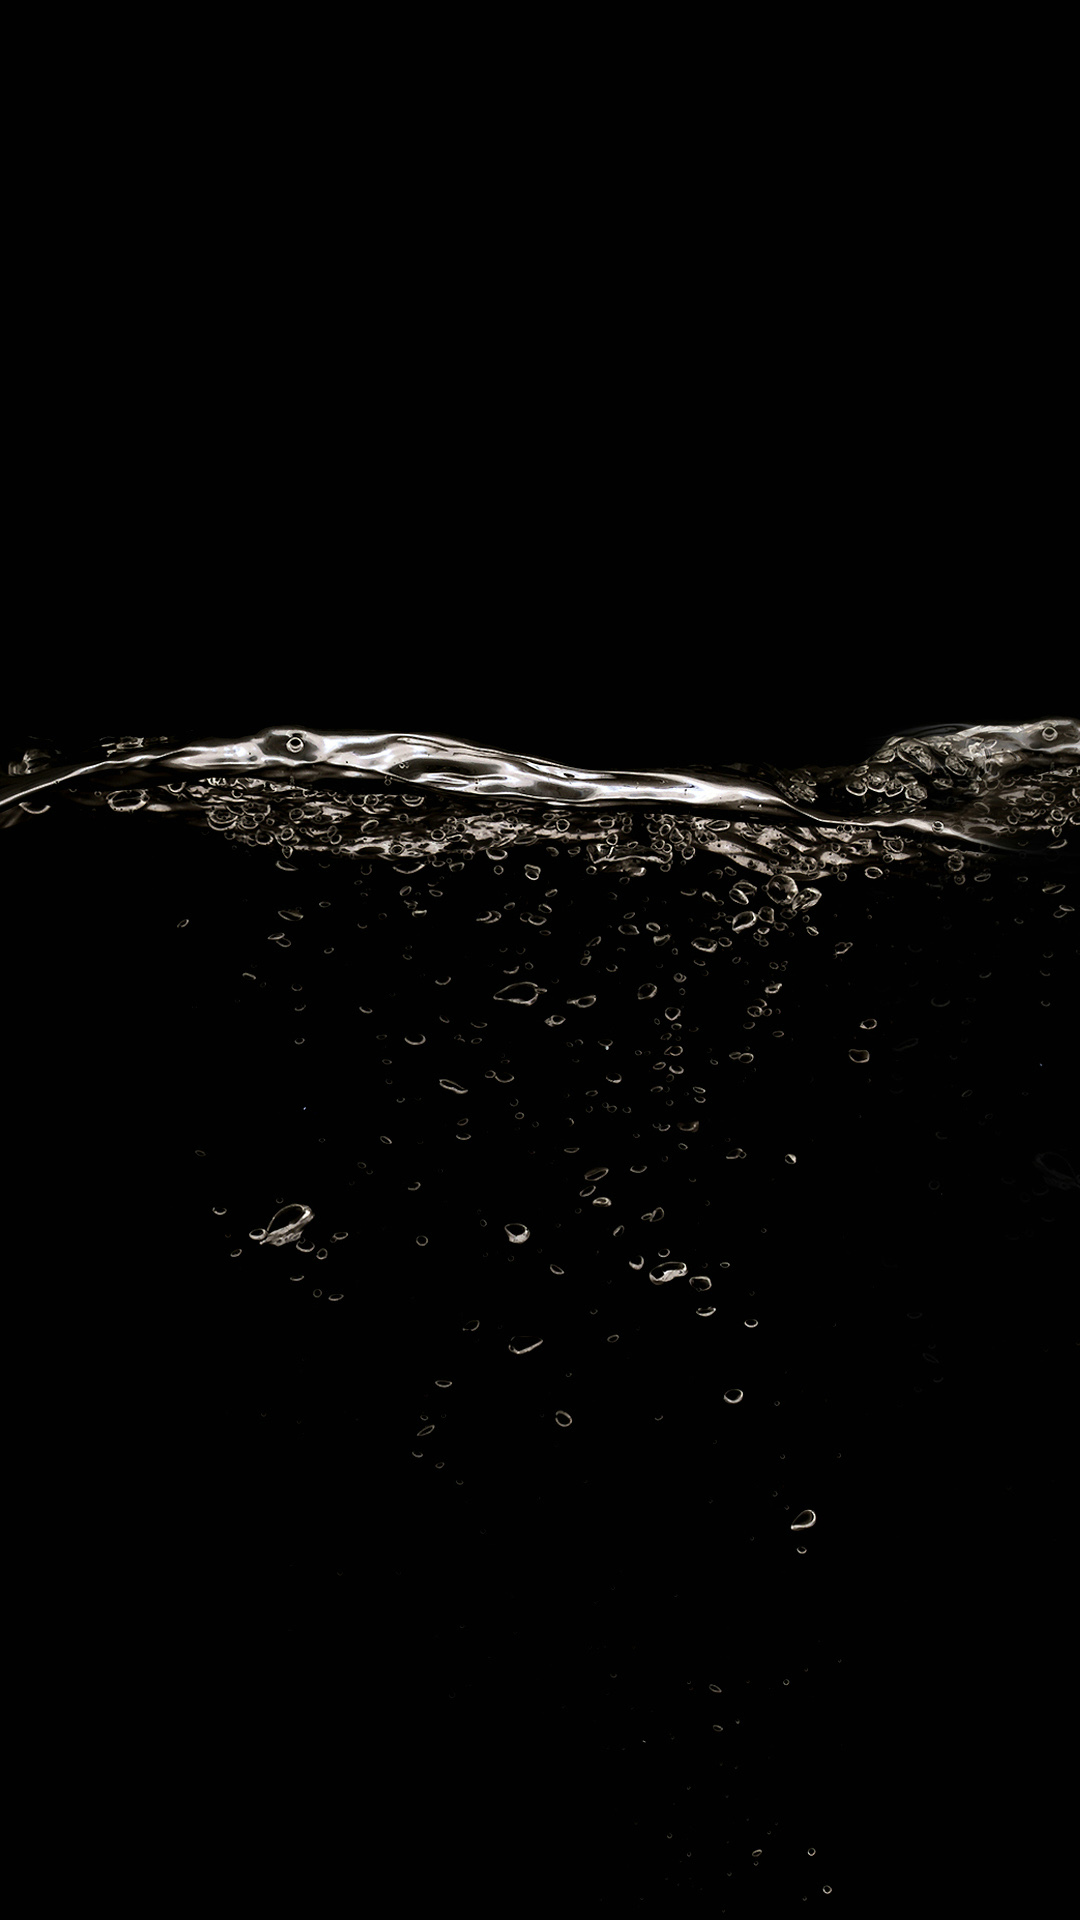 Black Abstract Water Division Android Wallpaper free download